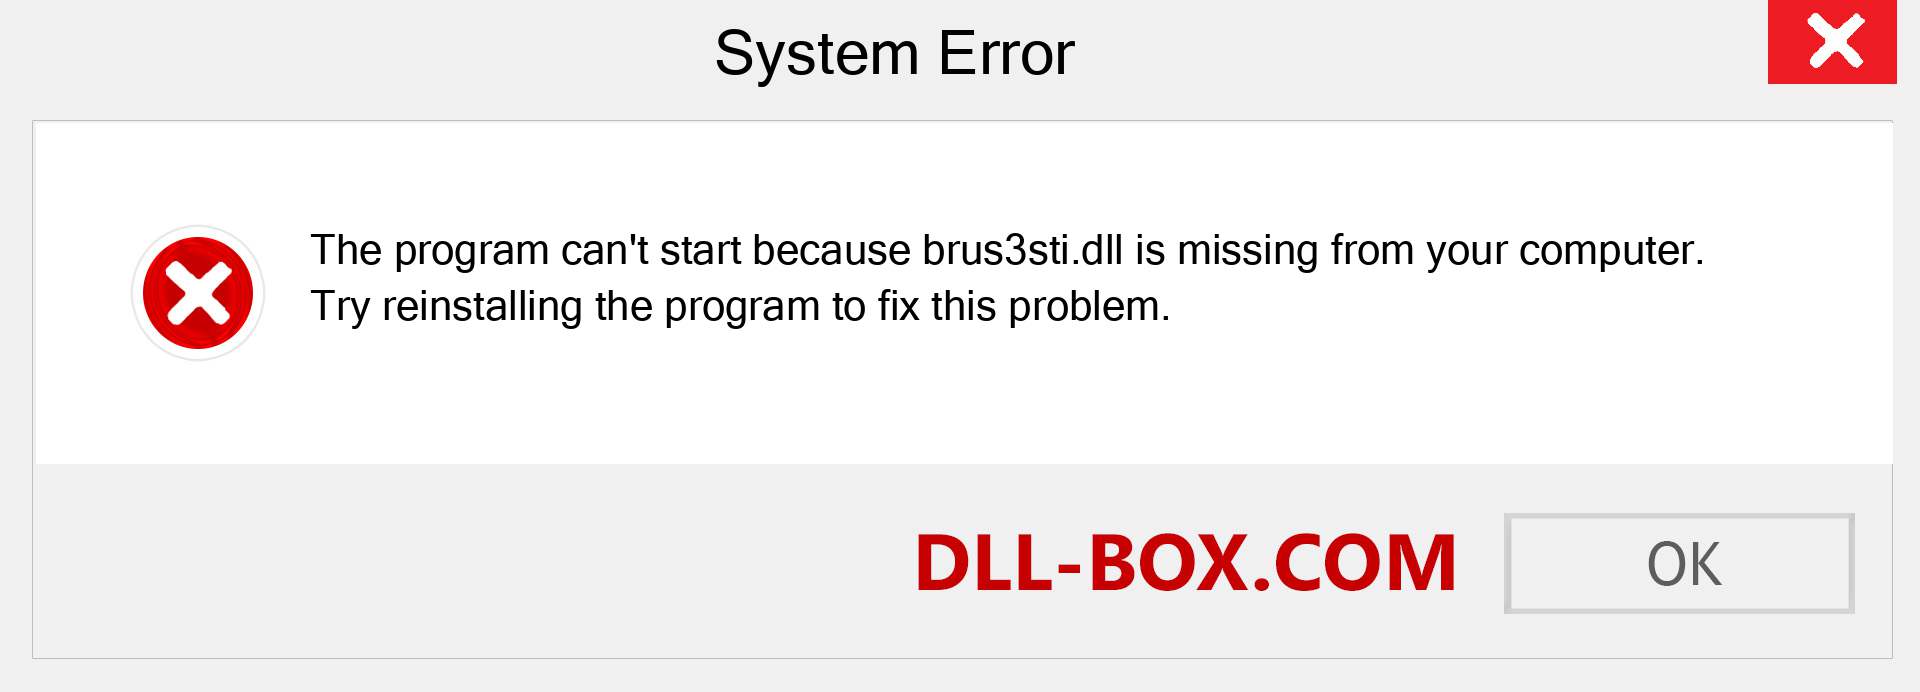  brus3sti.dll file is missing?. Download for Windows 7, 8, 10 - Fix  brus3sti dll Missing Error on Windows, photos, images